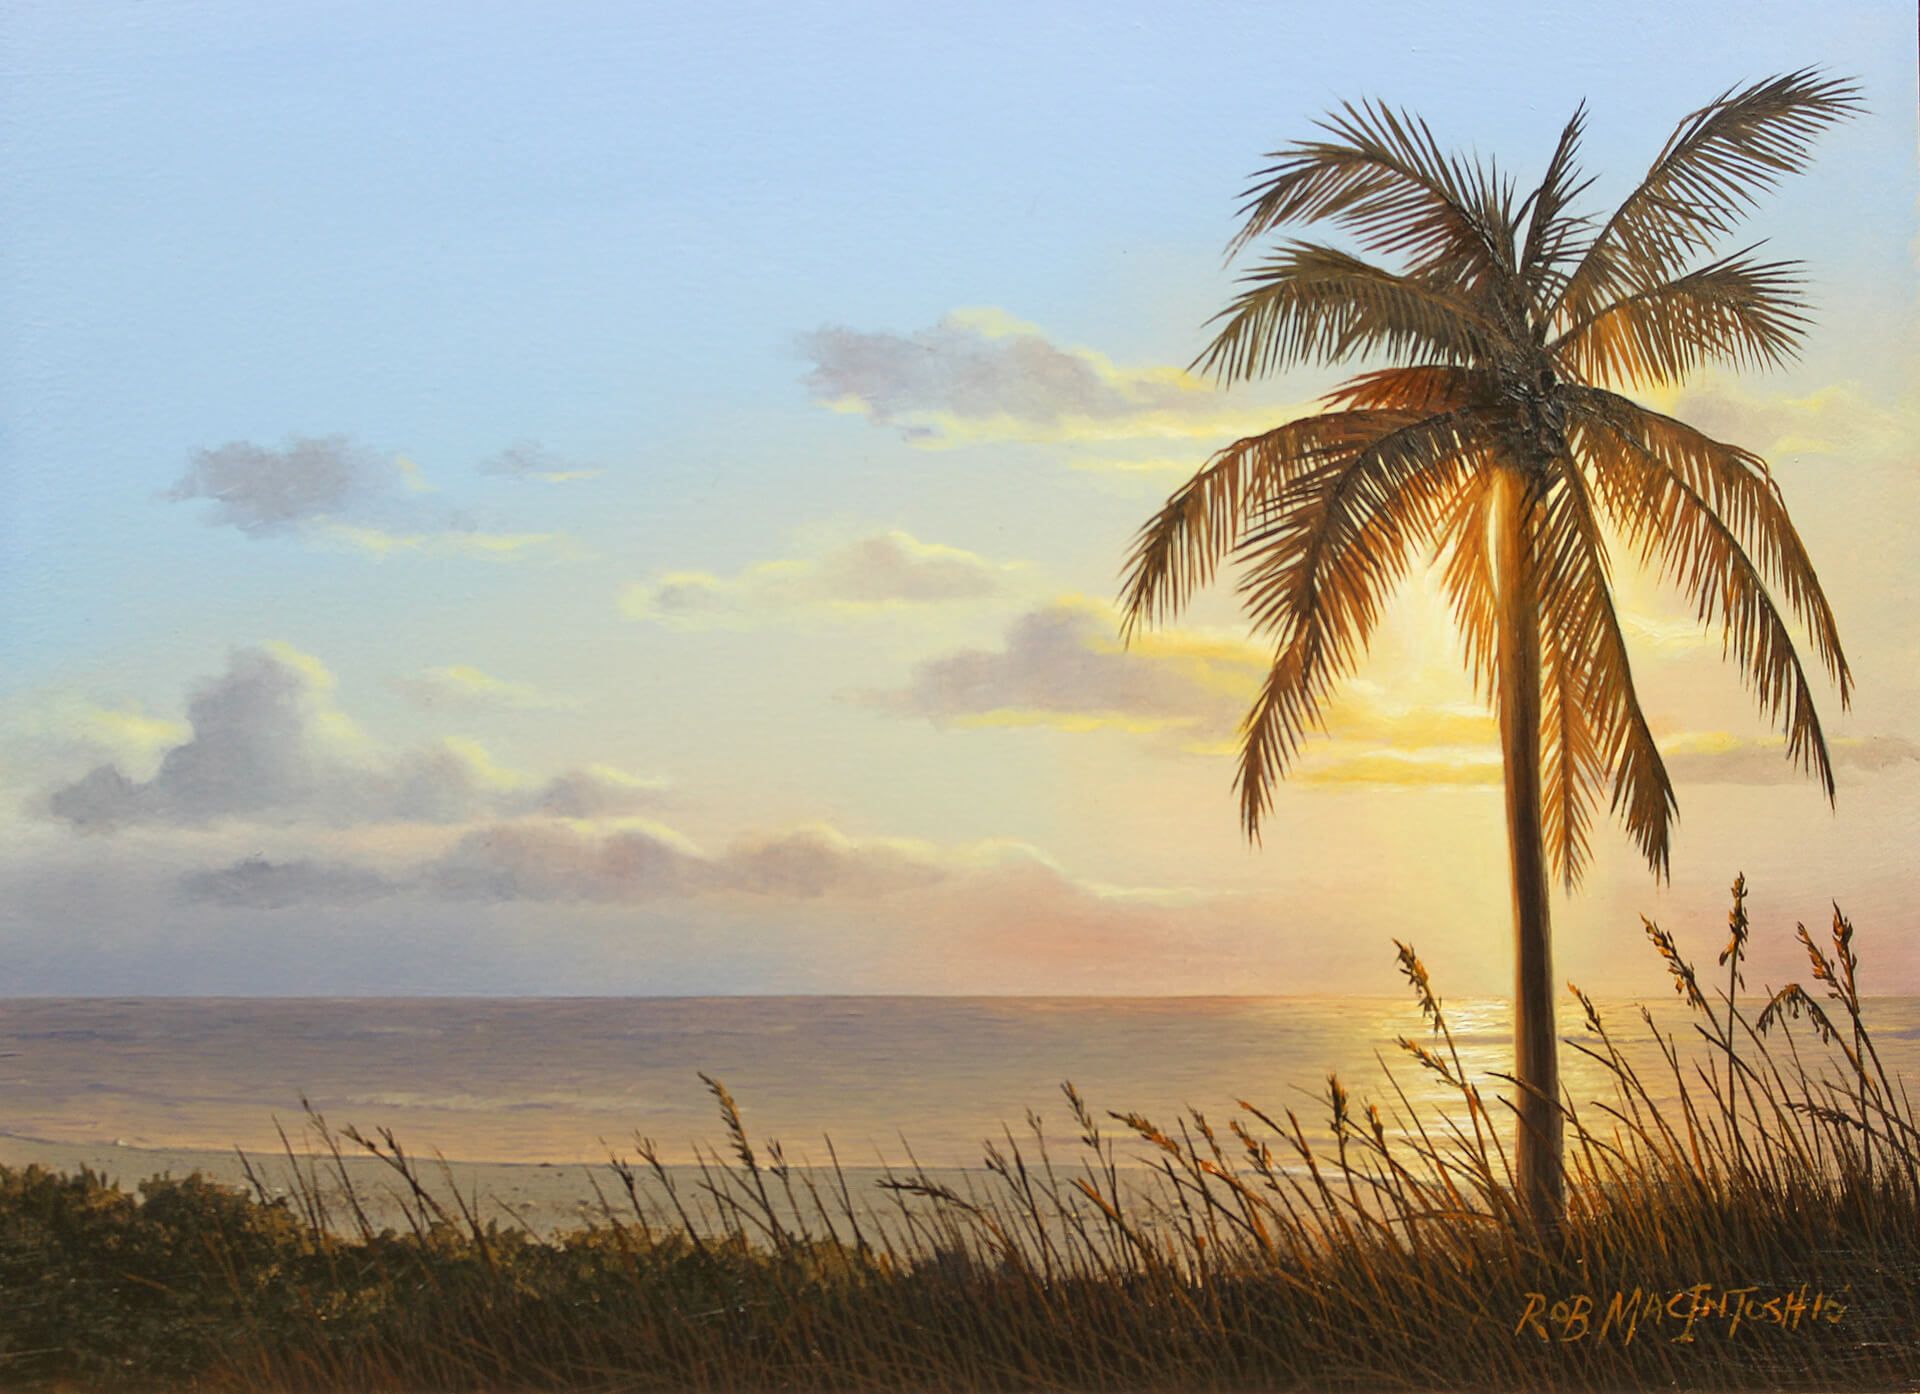 Photorealistic painting of a palm tree in front a sunset on a beach